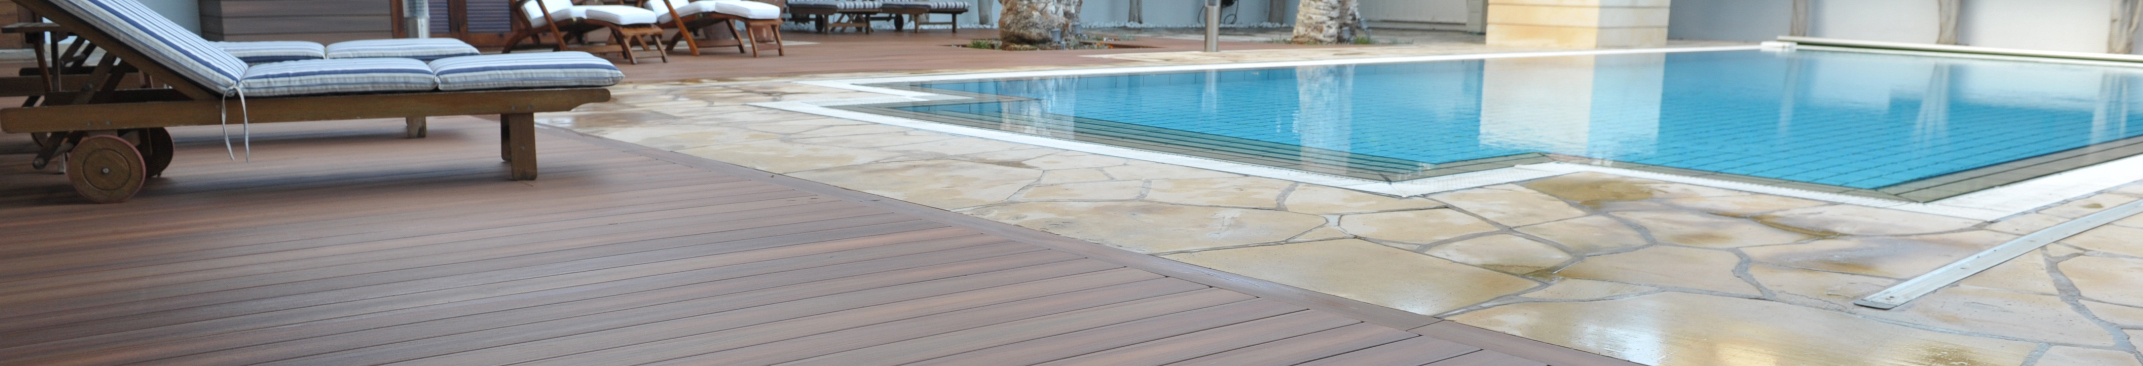 Deck Drainage System – Keeping You Dry, Even In The Rain